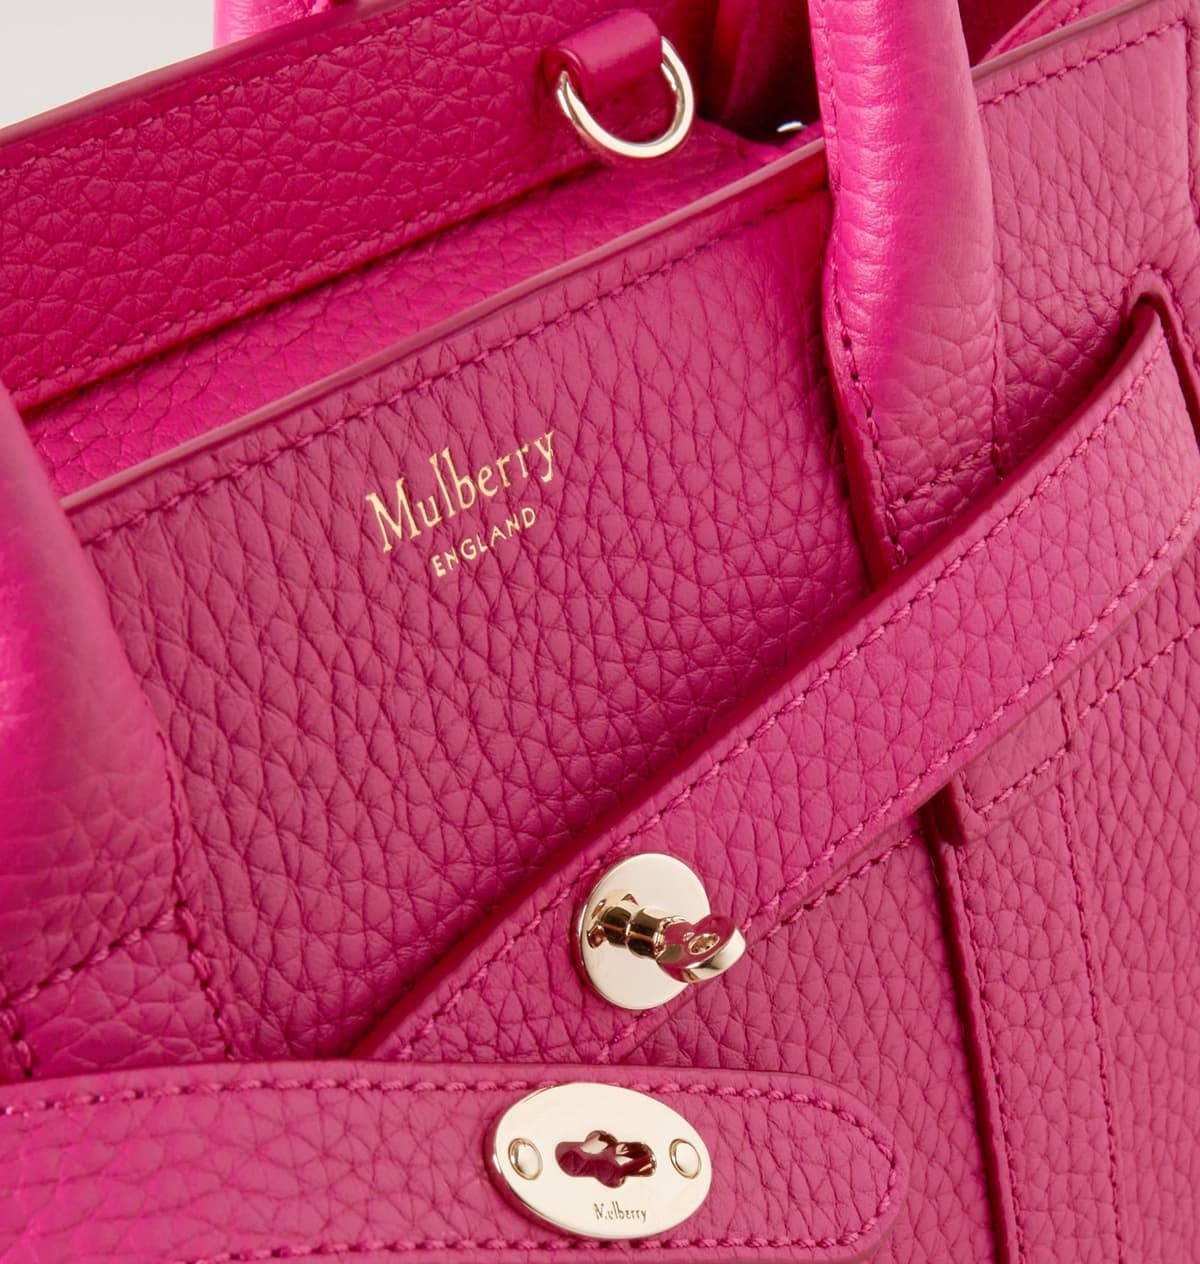 The Mulberry logo uses a custom typeface that is elegant and sophisticated, reflecting the brand's high-end fashion identity